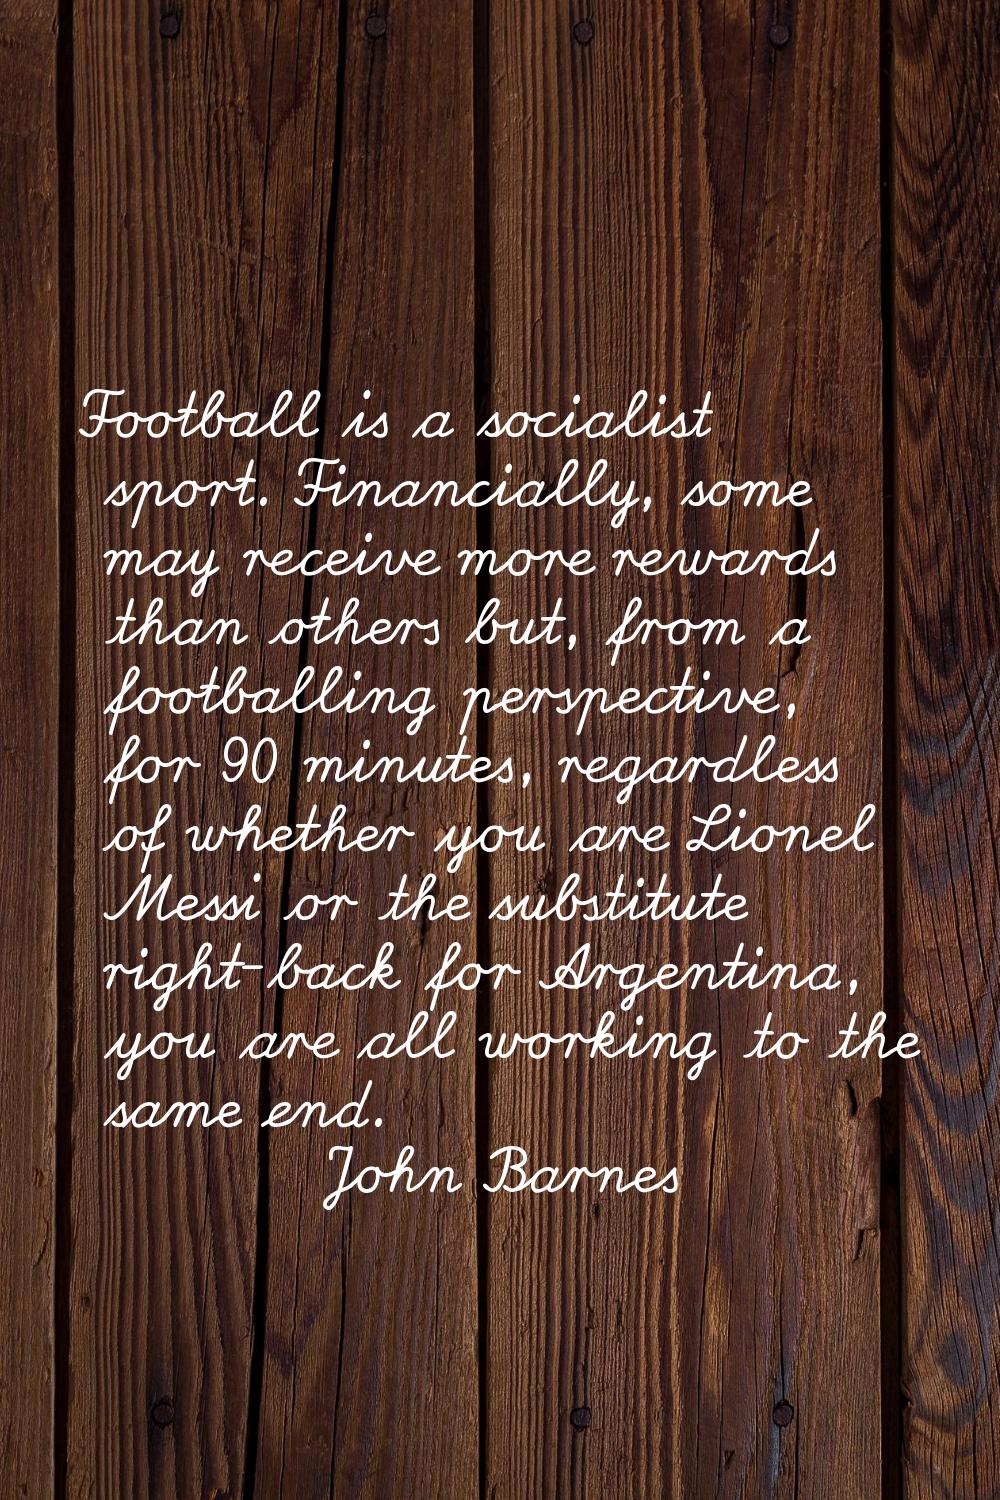 Football is a socialist sport. Financially, some may receive more rewards than others but, from a f